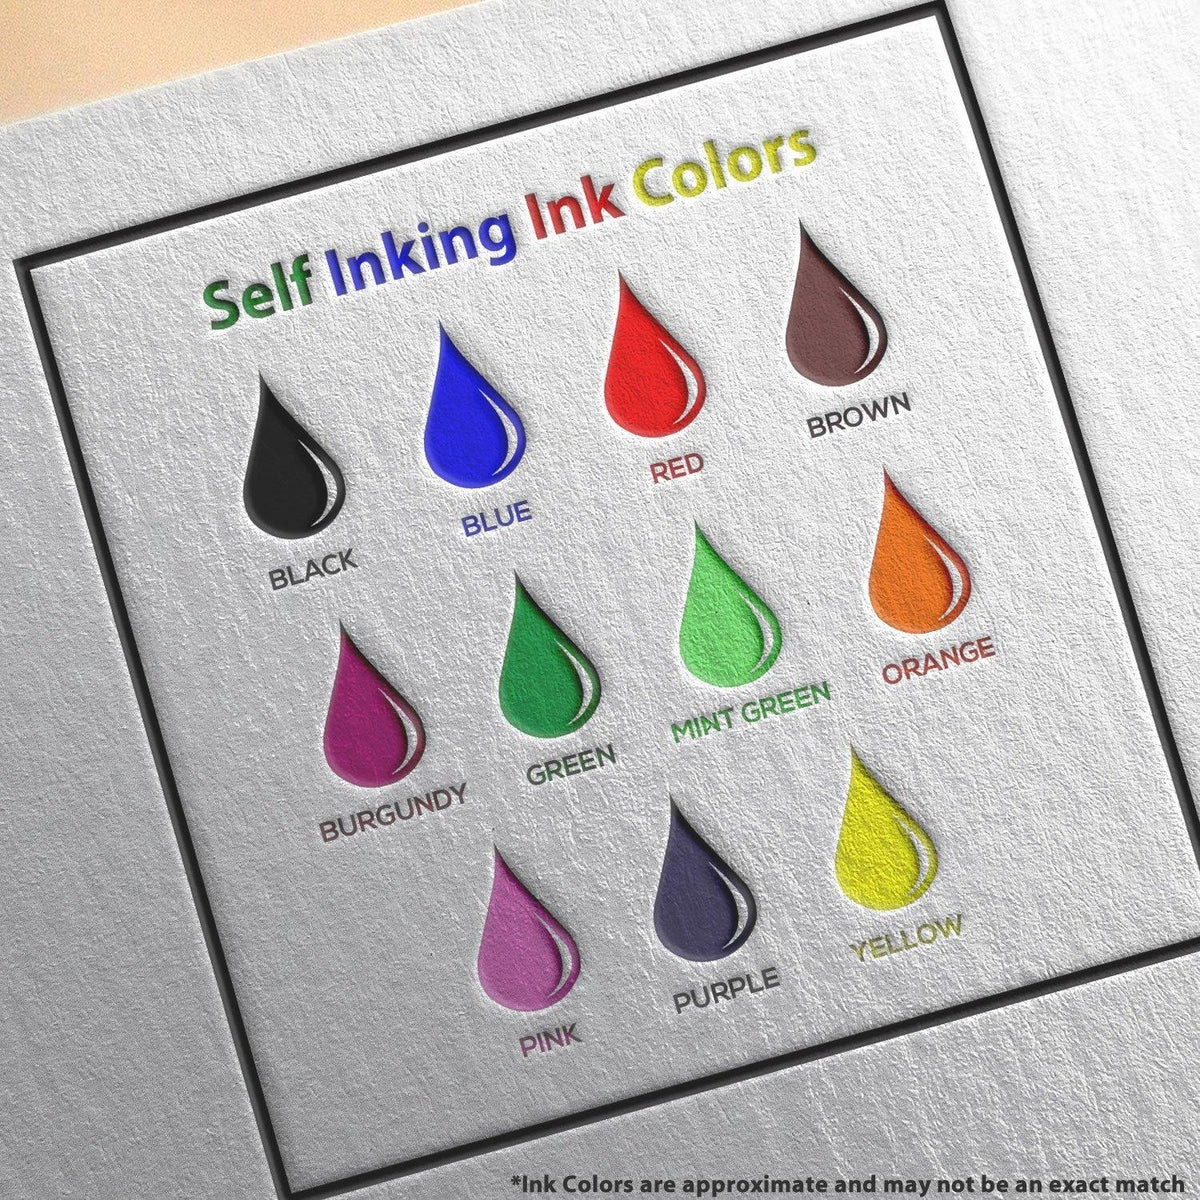 Self-Inking Express Mail International Stamp - Engineer Seal Stamps - Brand_Trodat, Impression Size_Small, Stamp Type_Self-Inking Stamp, Type of Use_Business, Type of Use_Postal &amp; Mailing